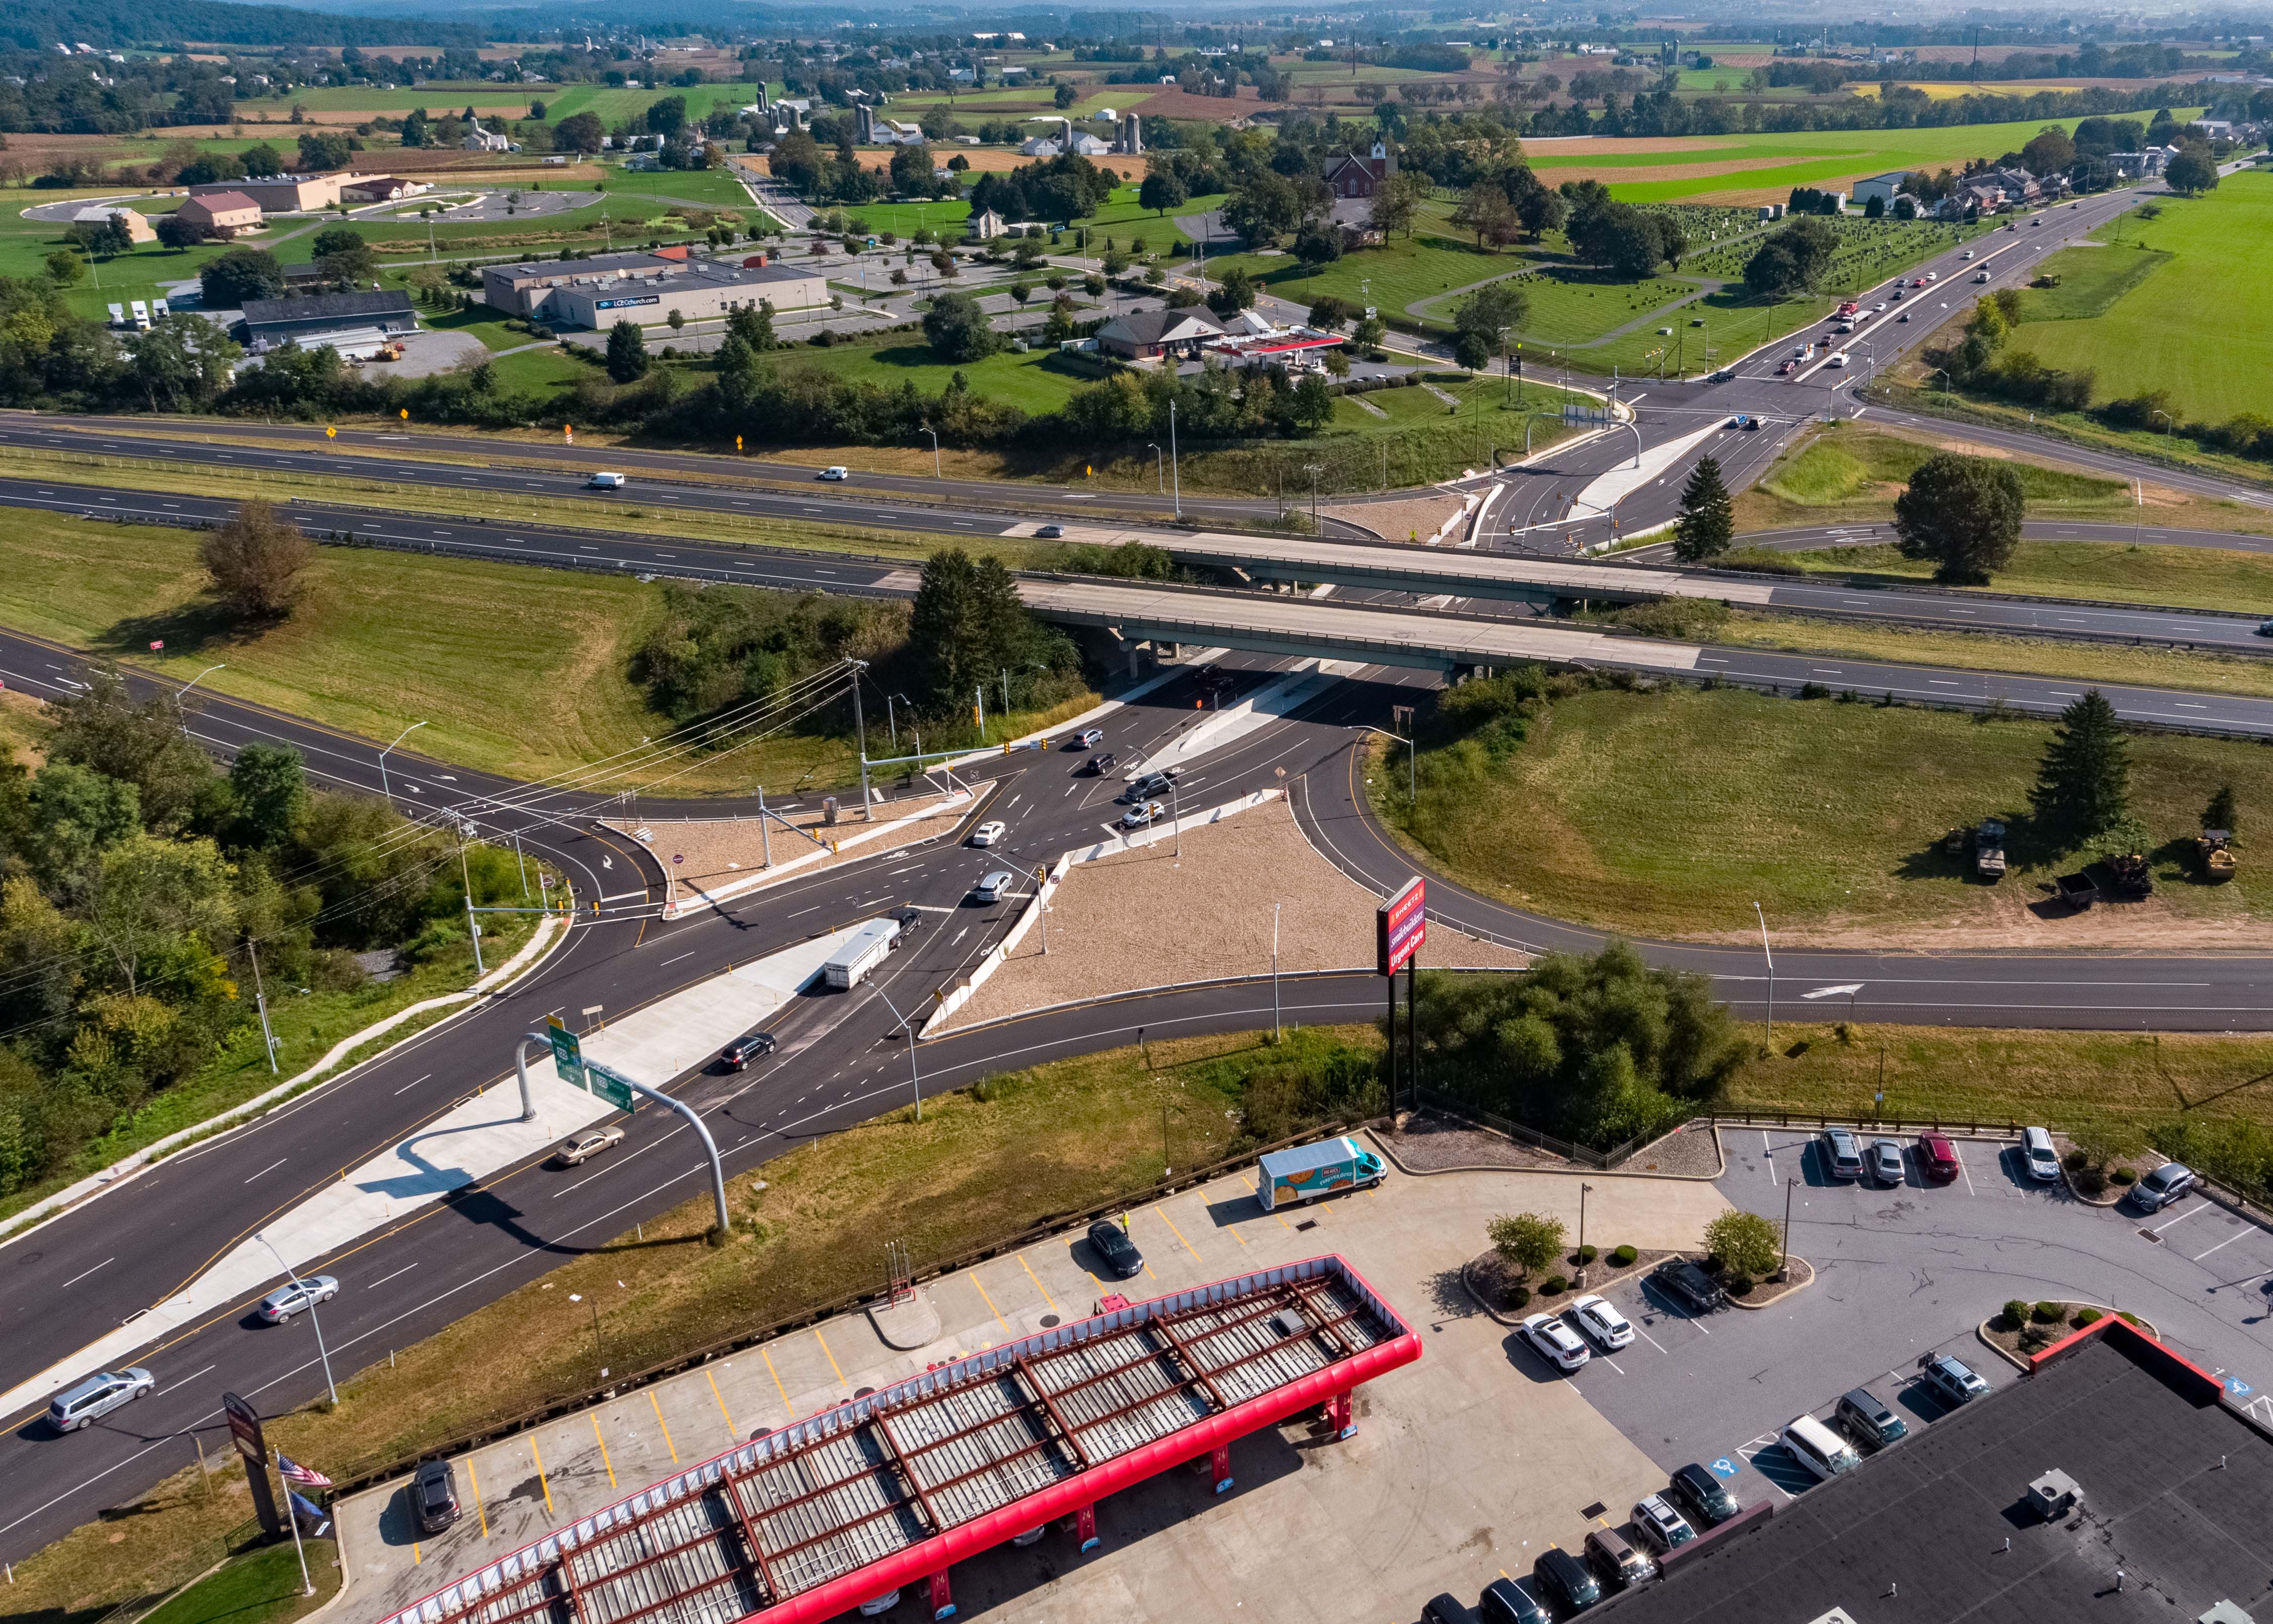 An aerial image of the newly constructed Diverging Diamond Interchange at 322/222, showing how crossroad traffic in both directions is transitioned or crossed over to the left side at a signal-controlled point and then transitioned back to the right side at a second signal-controlled point after passing through the interchange